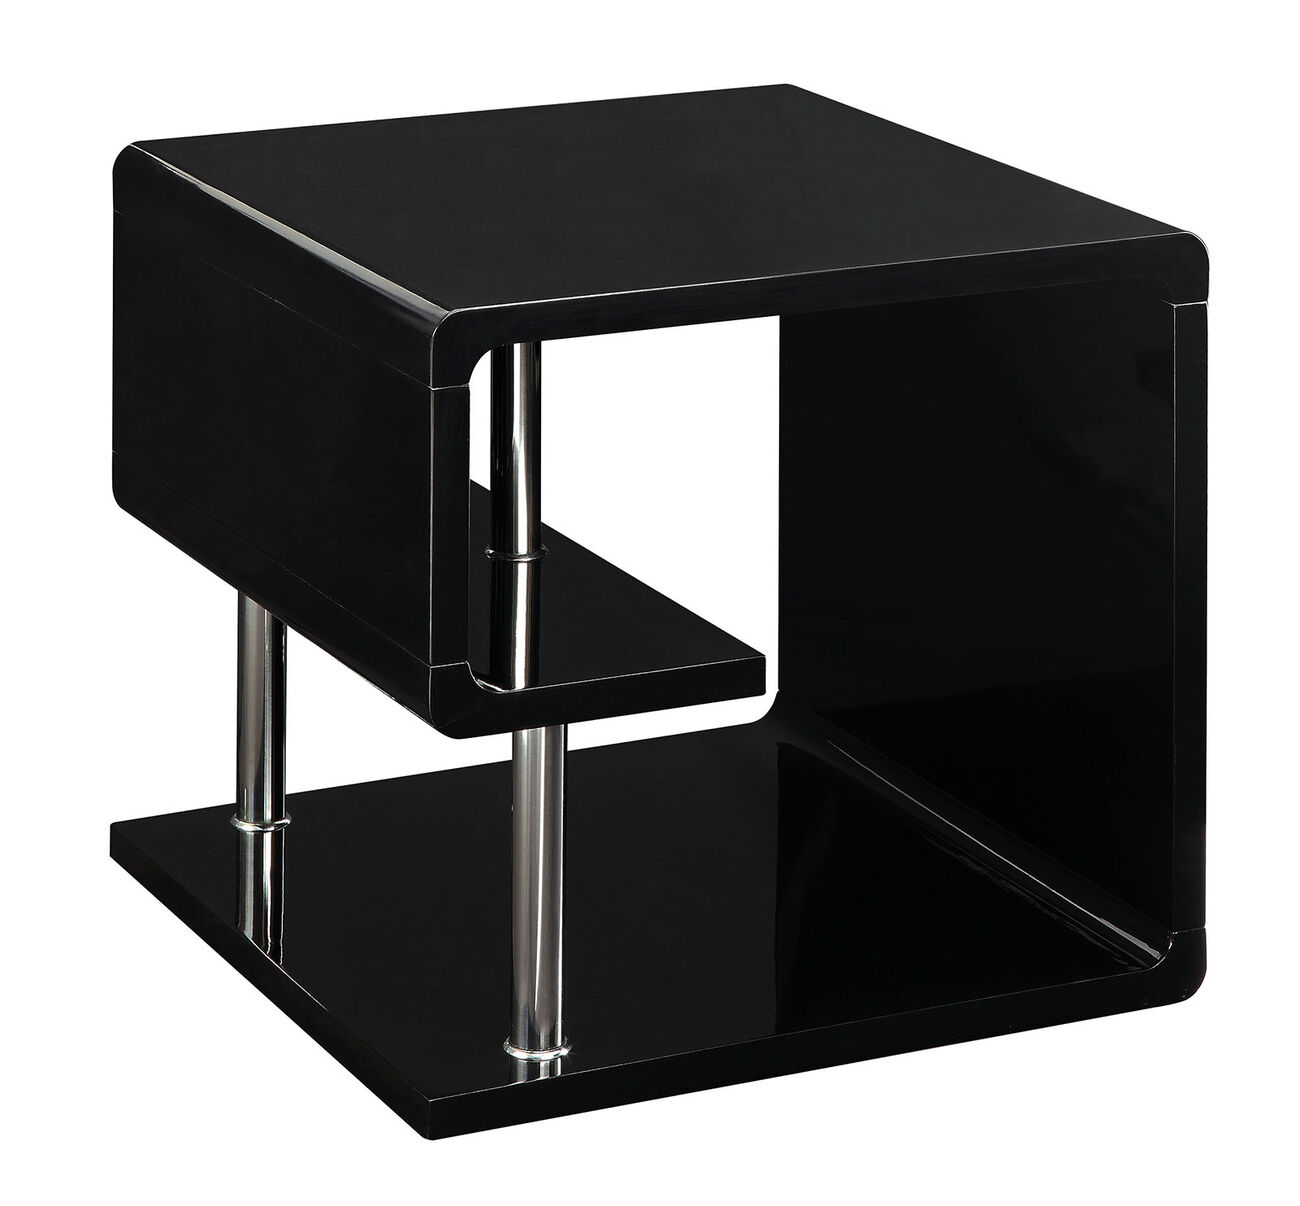 Ninove Contemporary Style End Table, Black